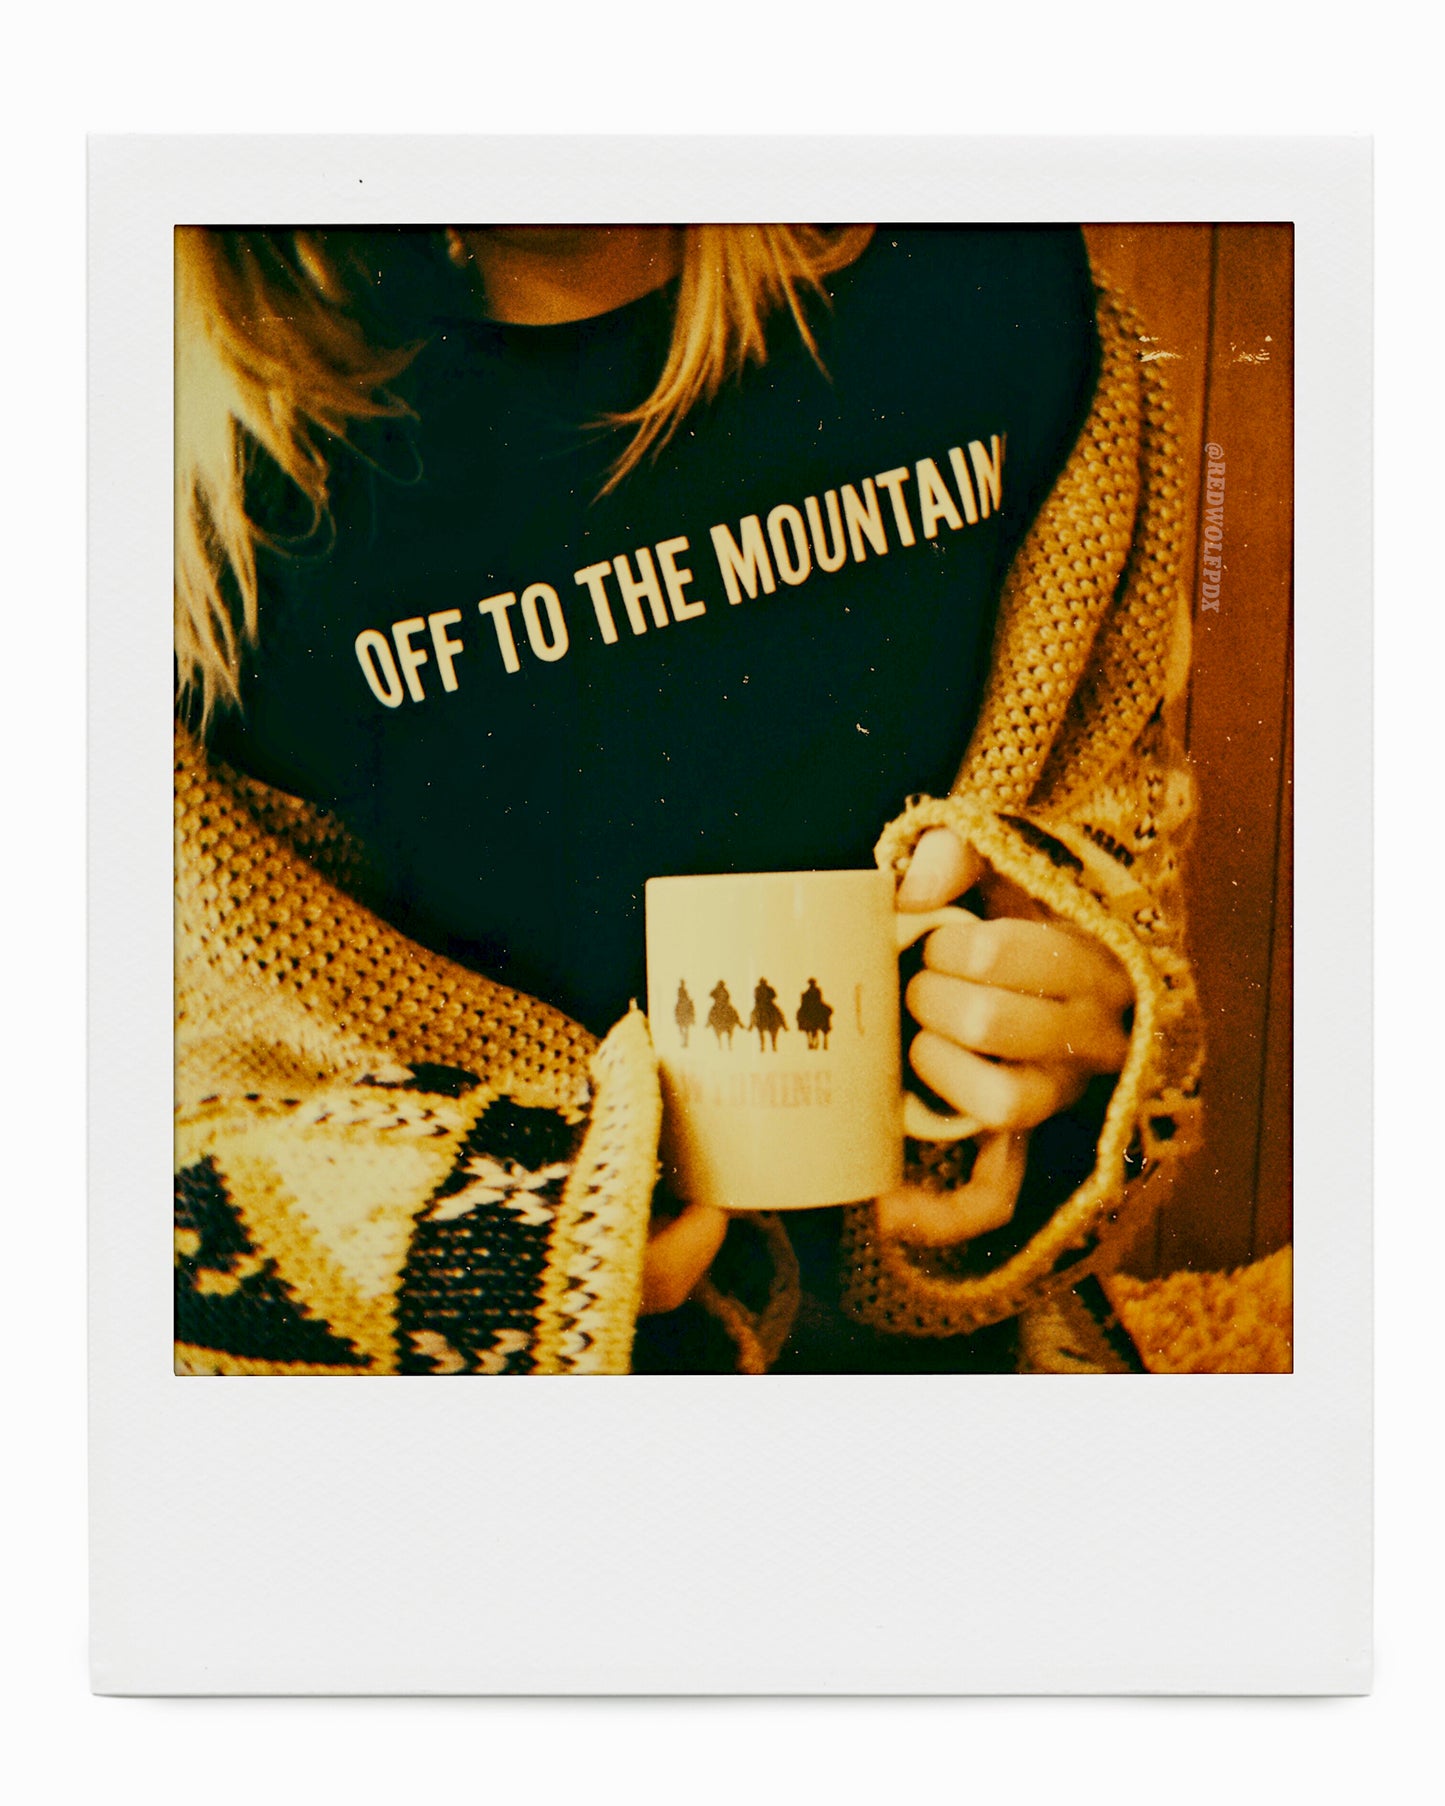   - Off to the Mountains Tee - REDWOLF